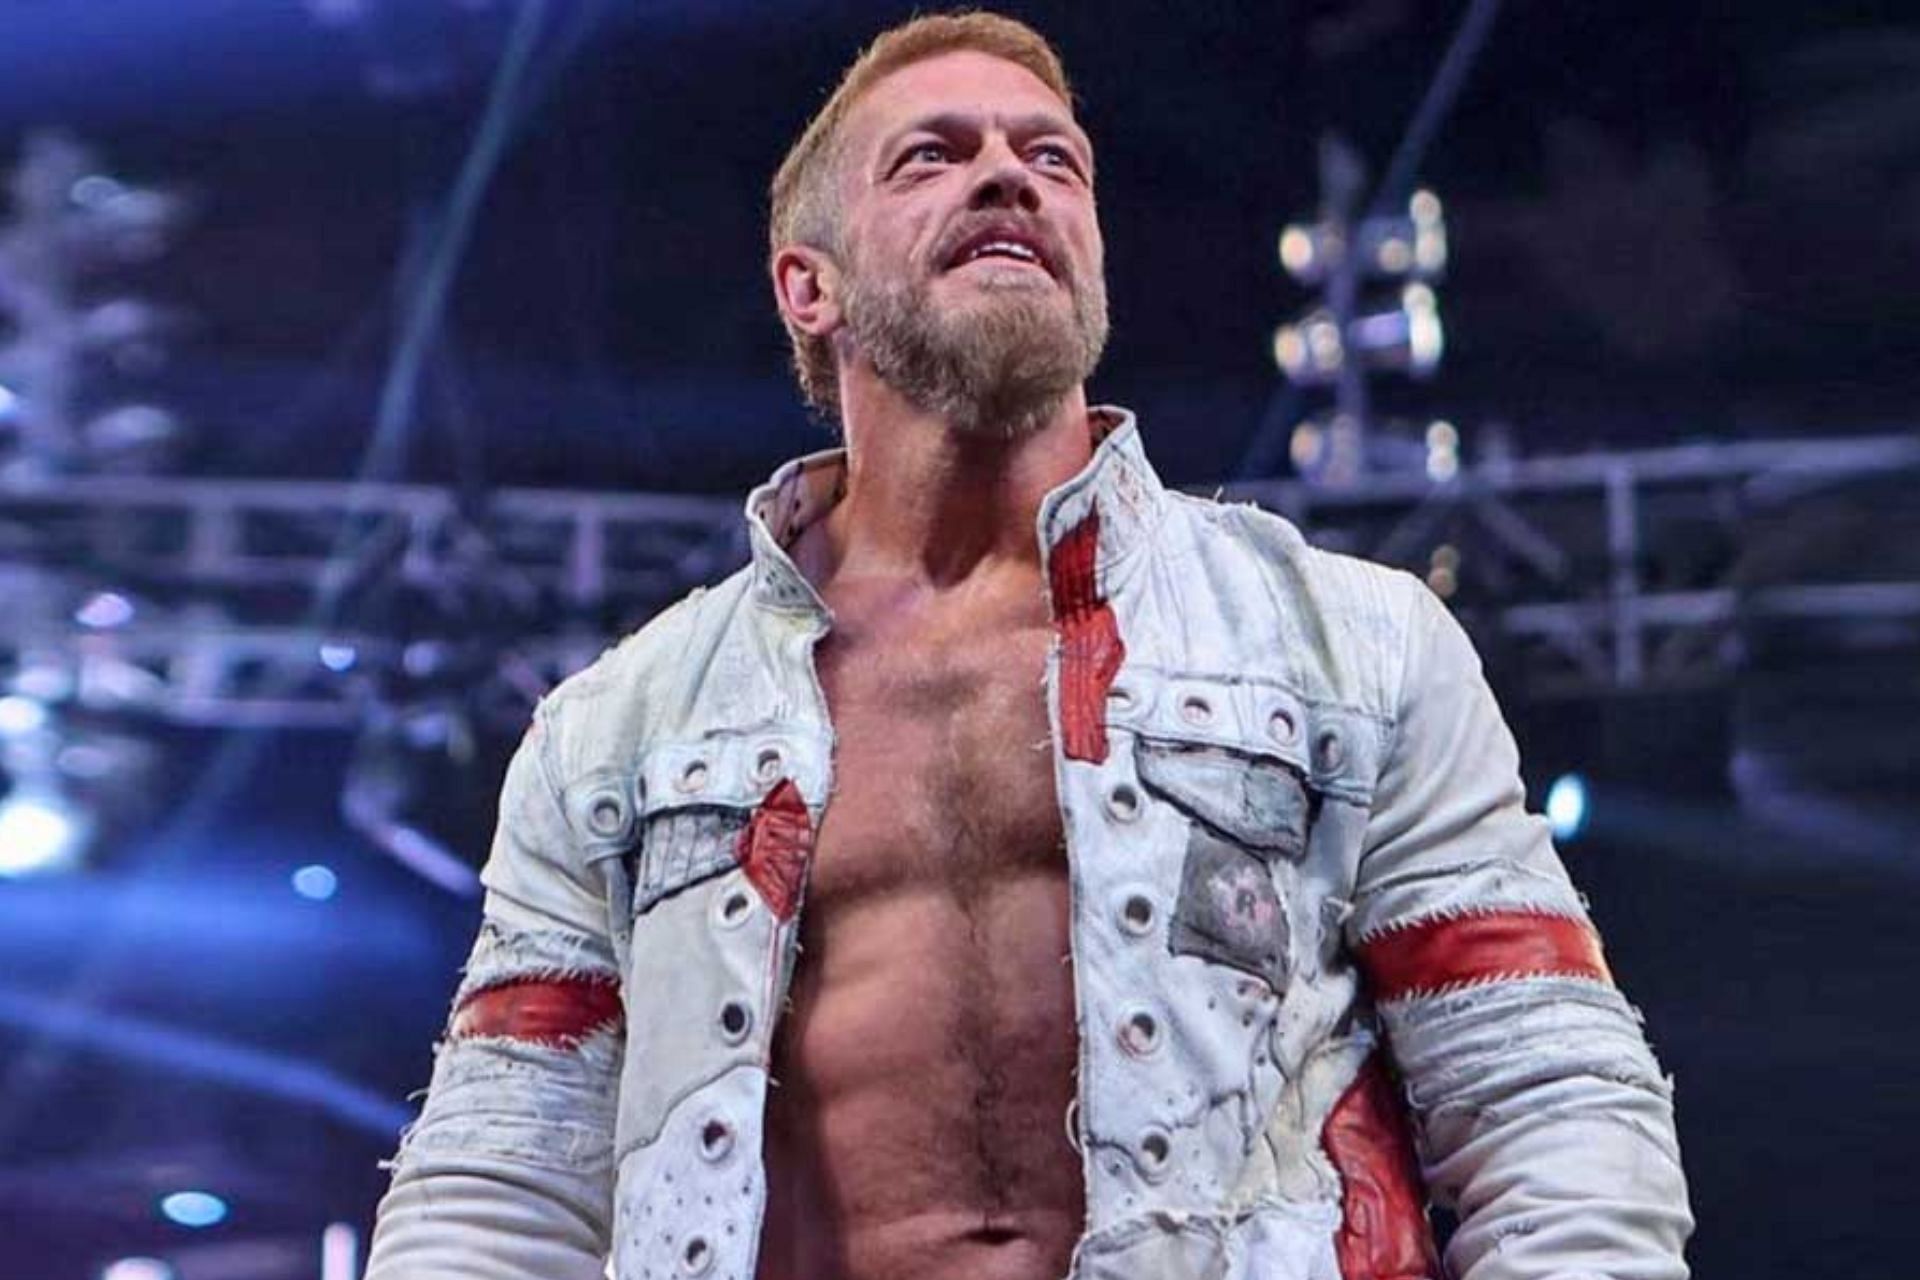 Edge finds another supporter in a WWE Hall of Famer